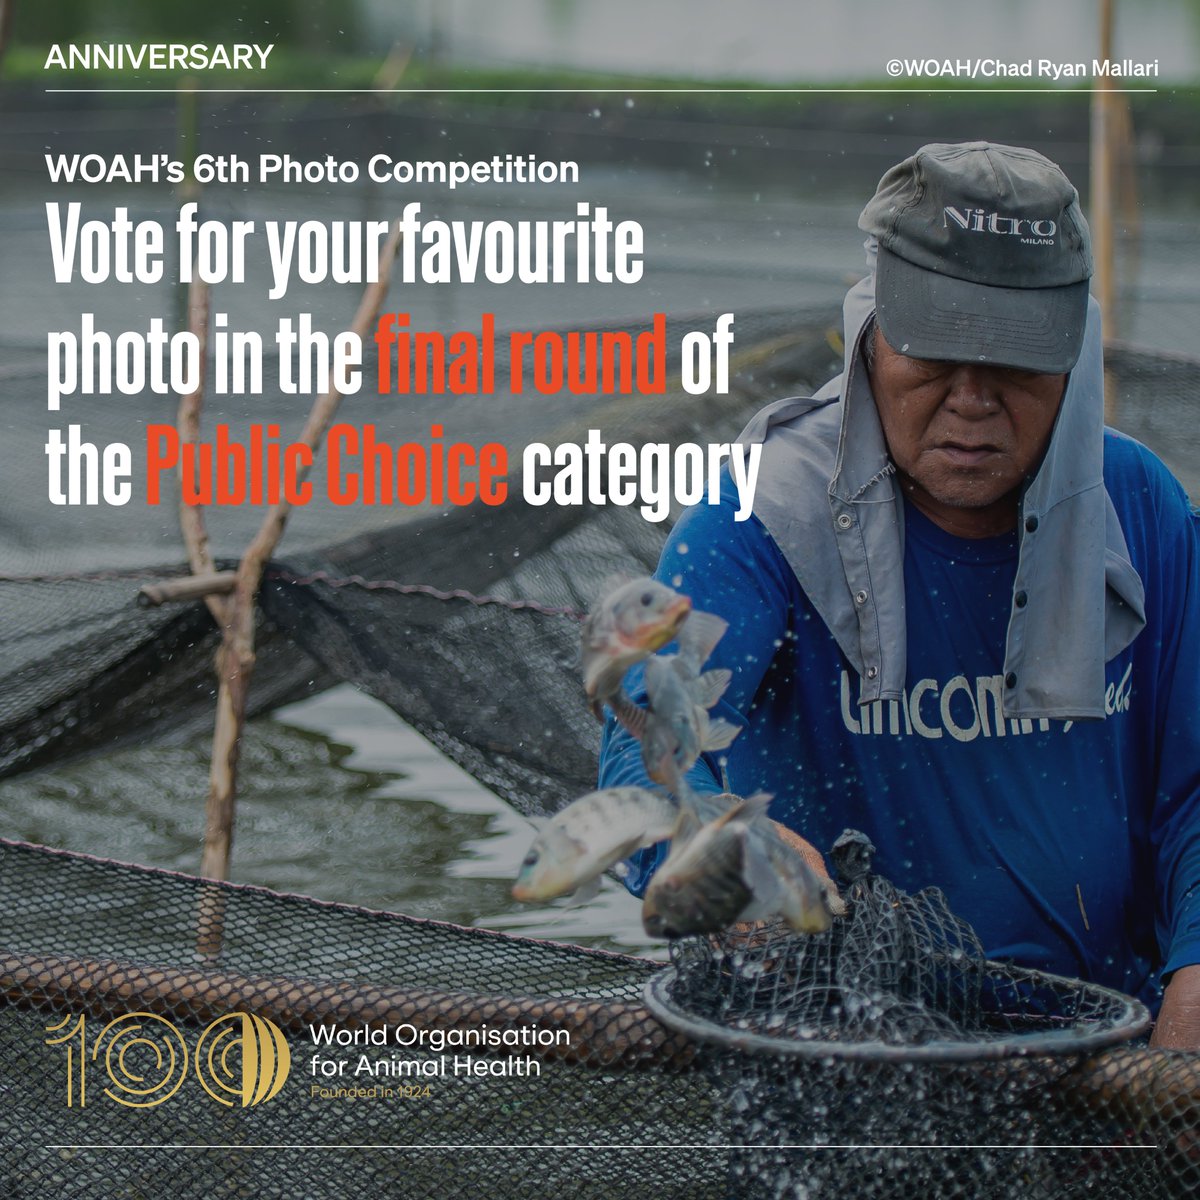 You're the judge for the final category of the Public Choice category of our 100th anniversary special photo competition. Cast your vote here: woah.org/en/photo-compe… #WOAH100